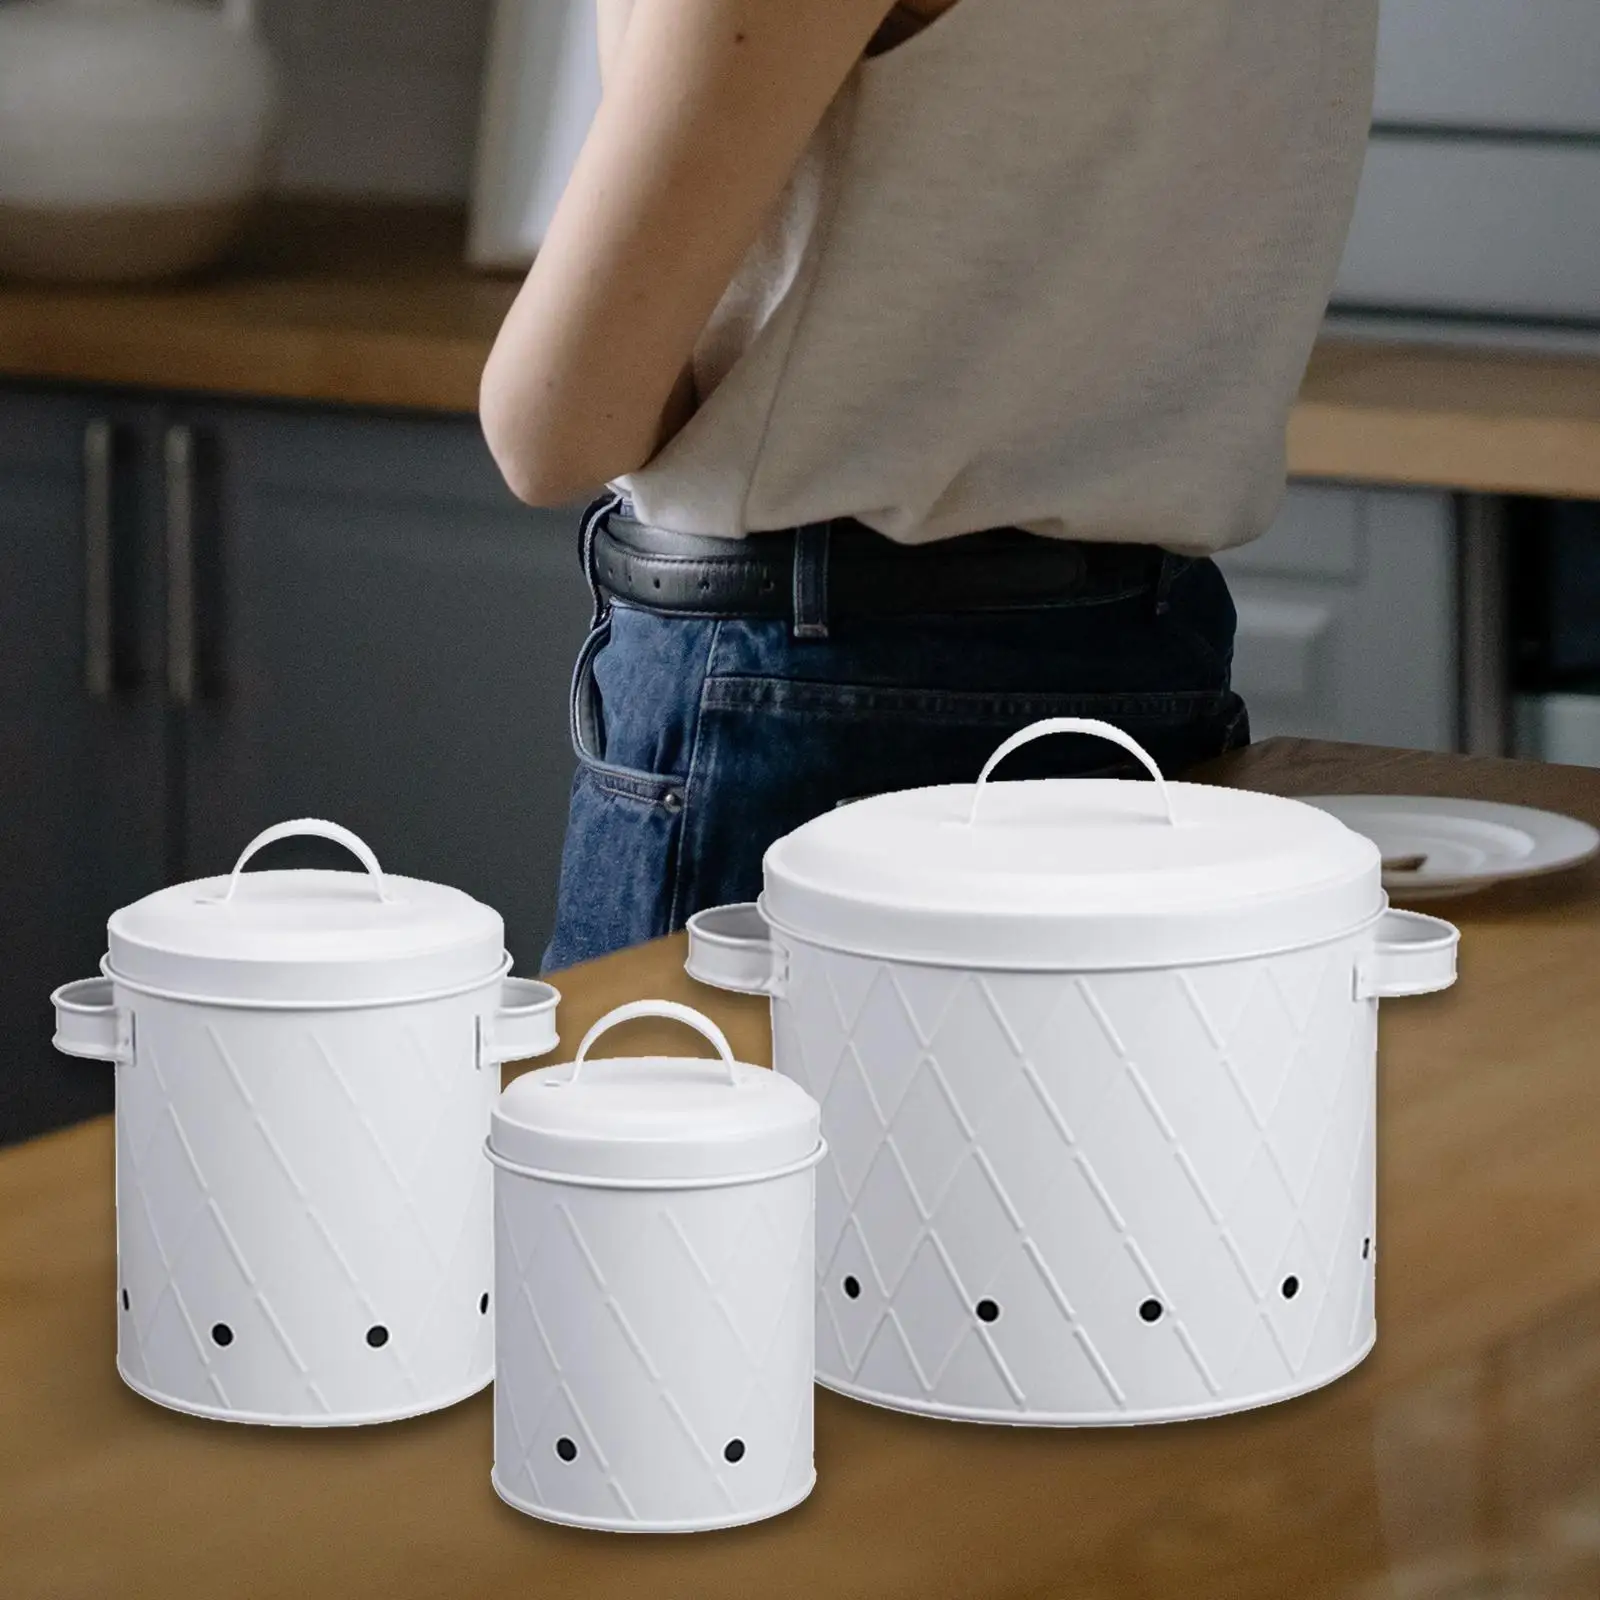 3Pcs Farmhouse Kitchen Canisters Set Pots Tins for Camping Picnic Countertop